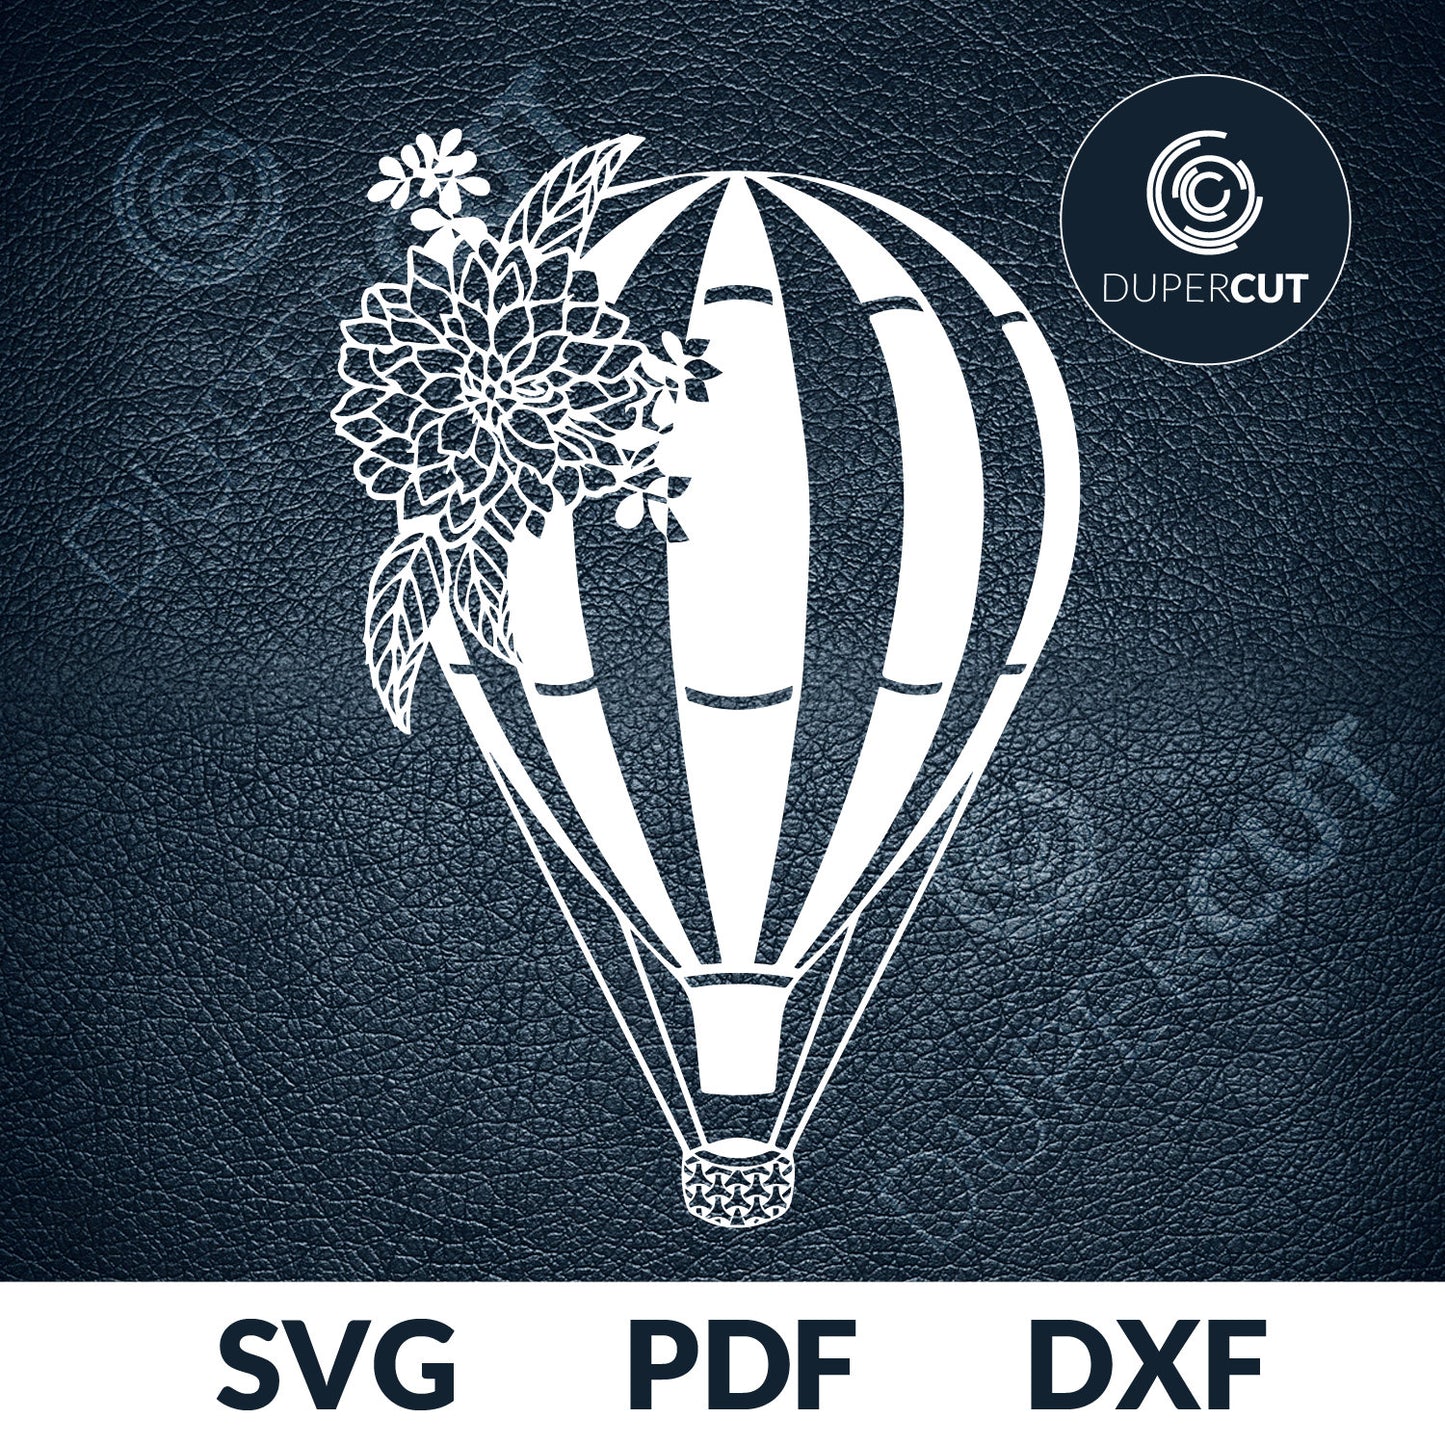 Paper cutting template - Hot Air Balloons with flowers, wedding decoration - SVG PNG DXF files for cutting machines: Cricut, Silhouette Cameo, Glowforge, CNC